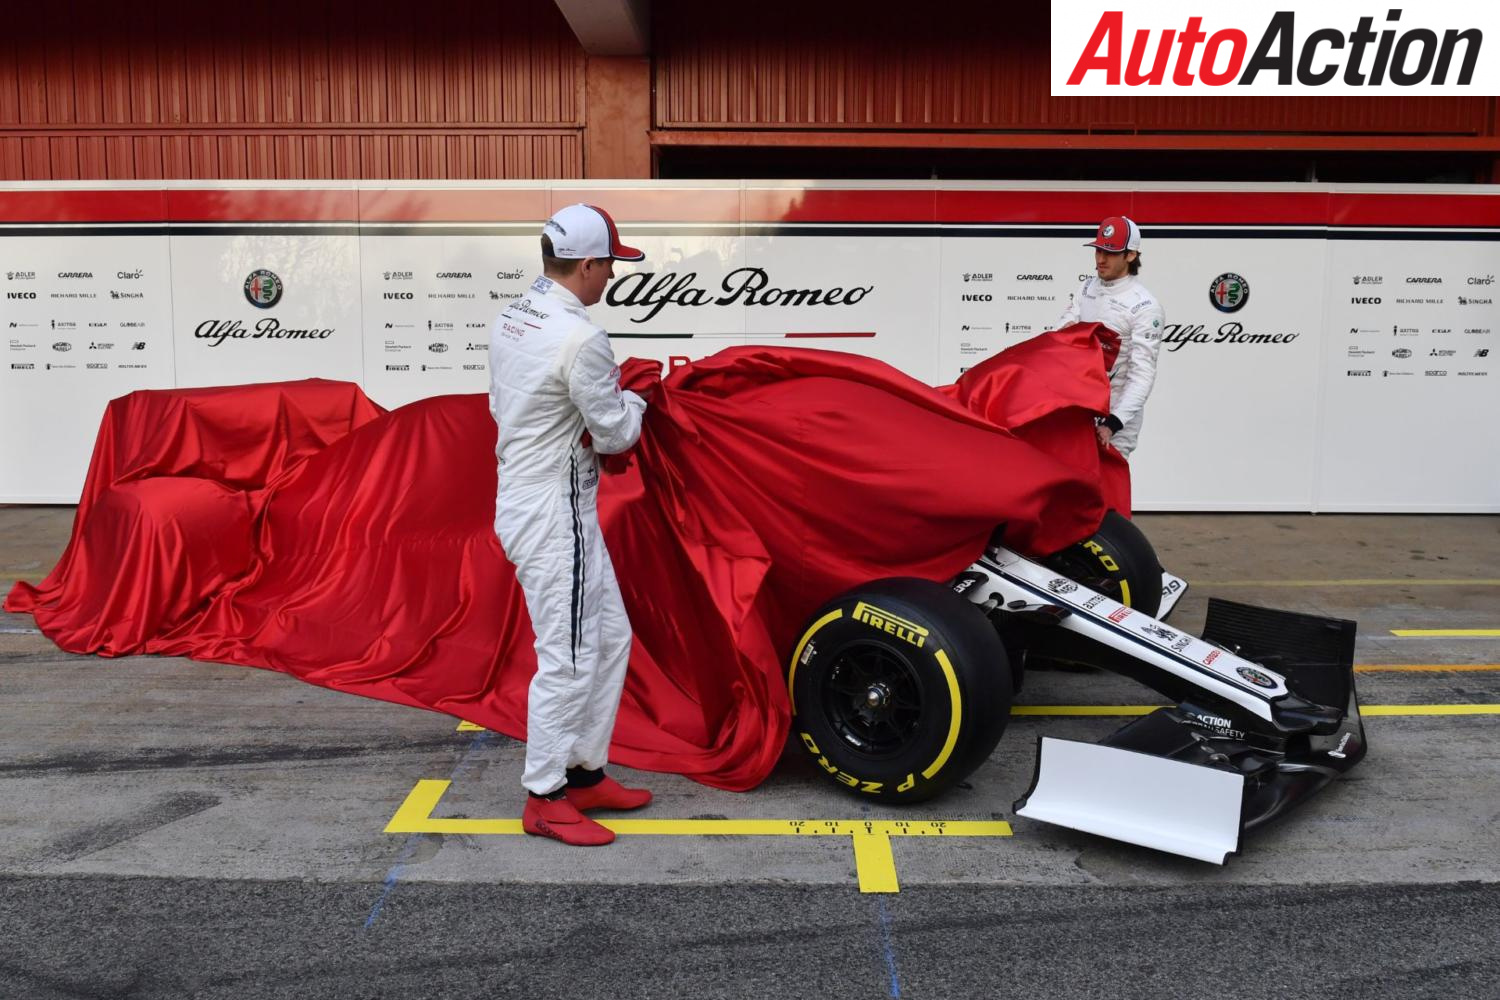 New F1 cars to be unveiled - Photo: Suttons Images